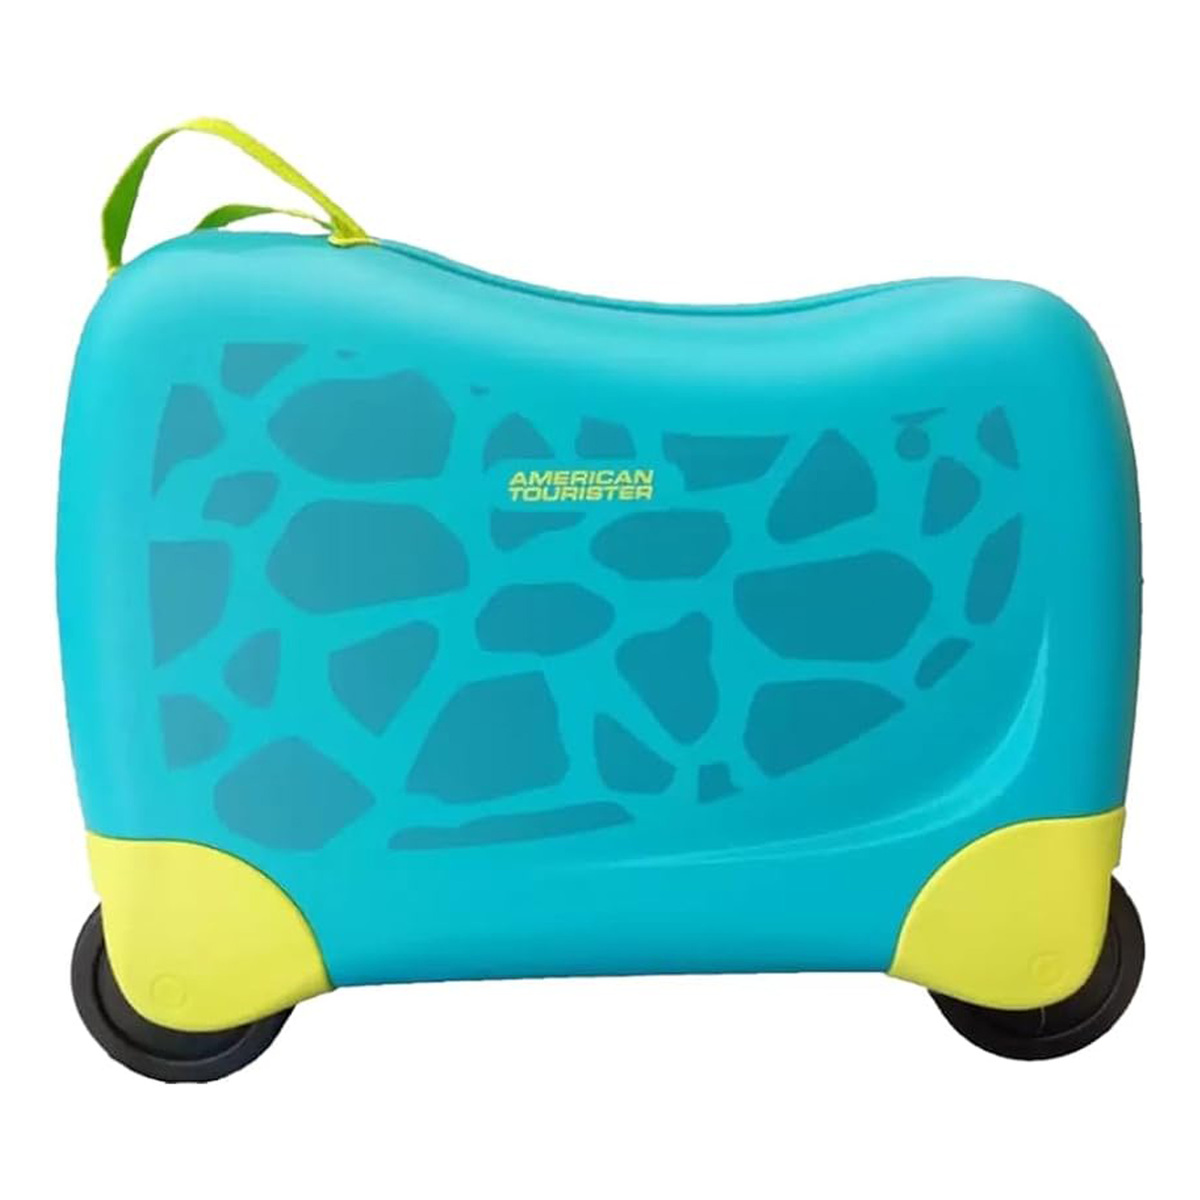 American Tourister Skittle NXT Kids Trolley, Turquoise Turtle, FHOM64411